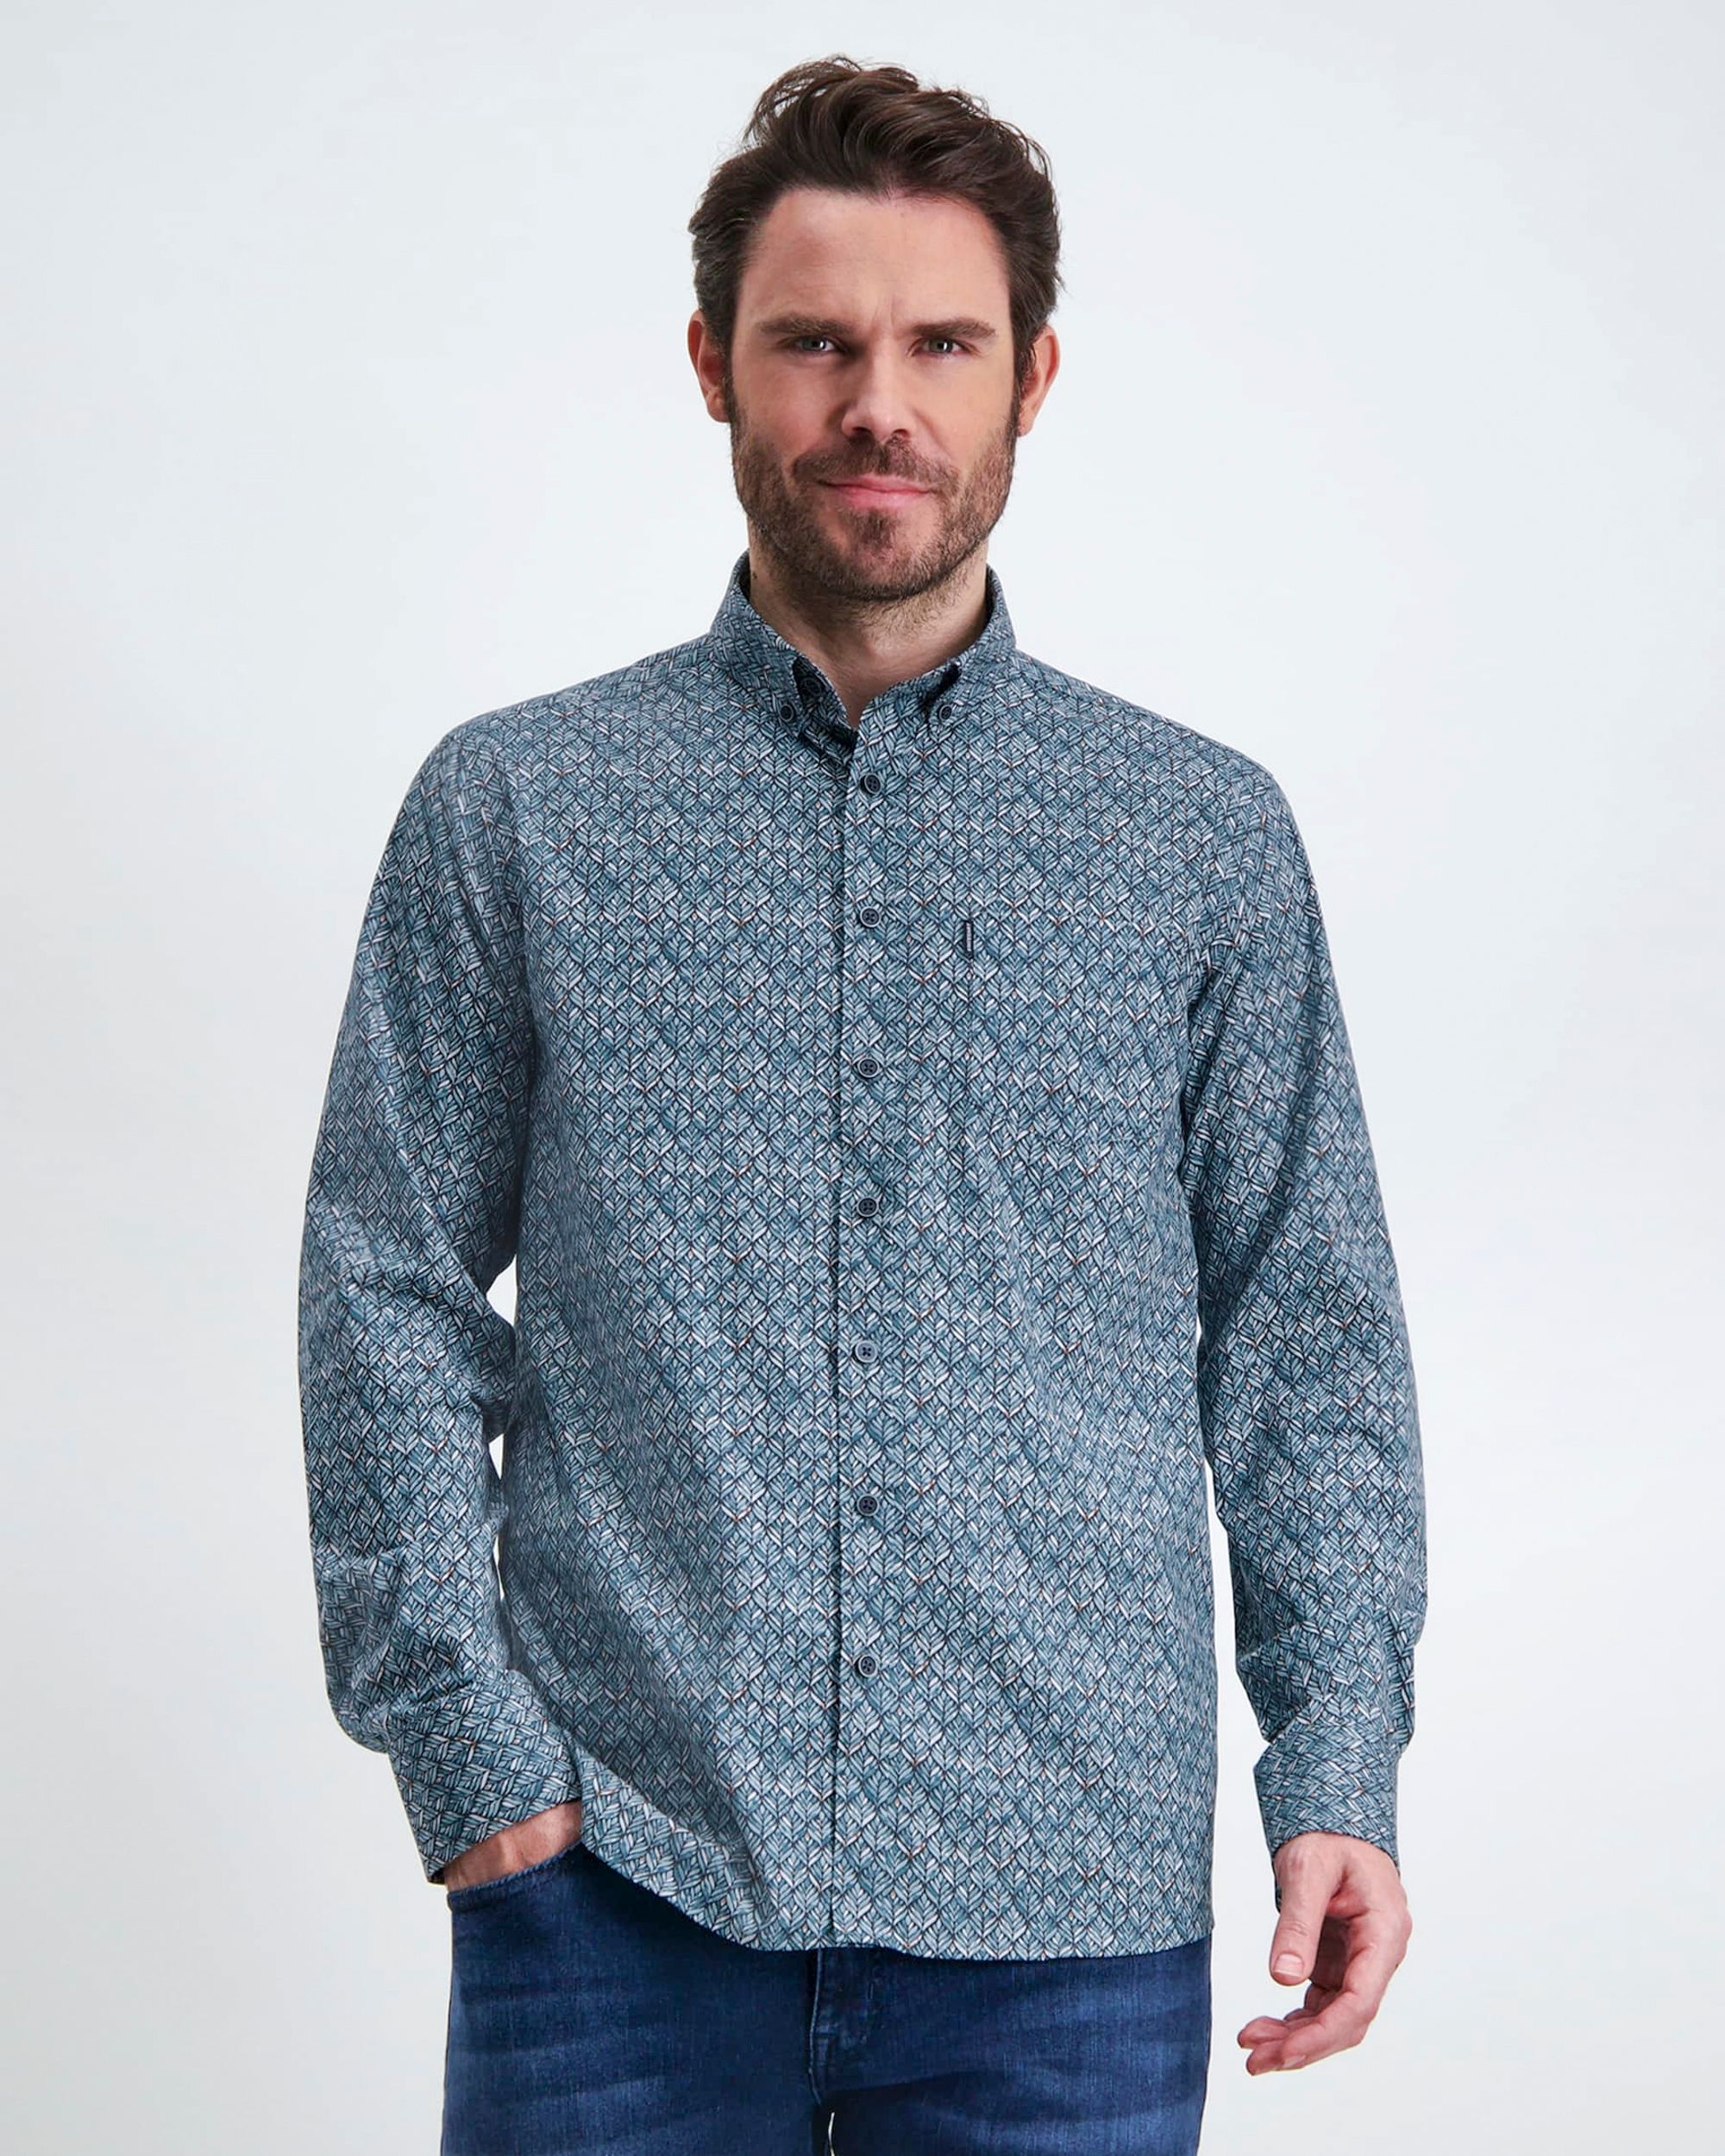 State of Art Casual Overhemd LM Blauw 091368-001-4XL